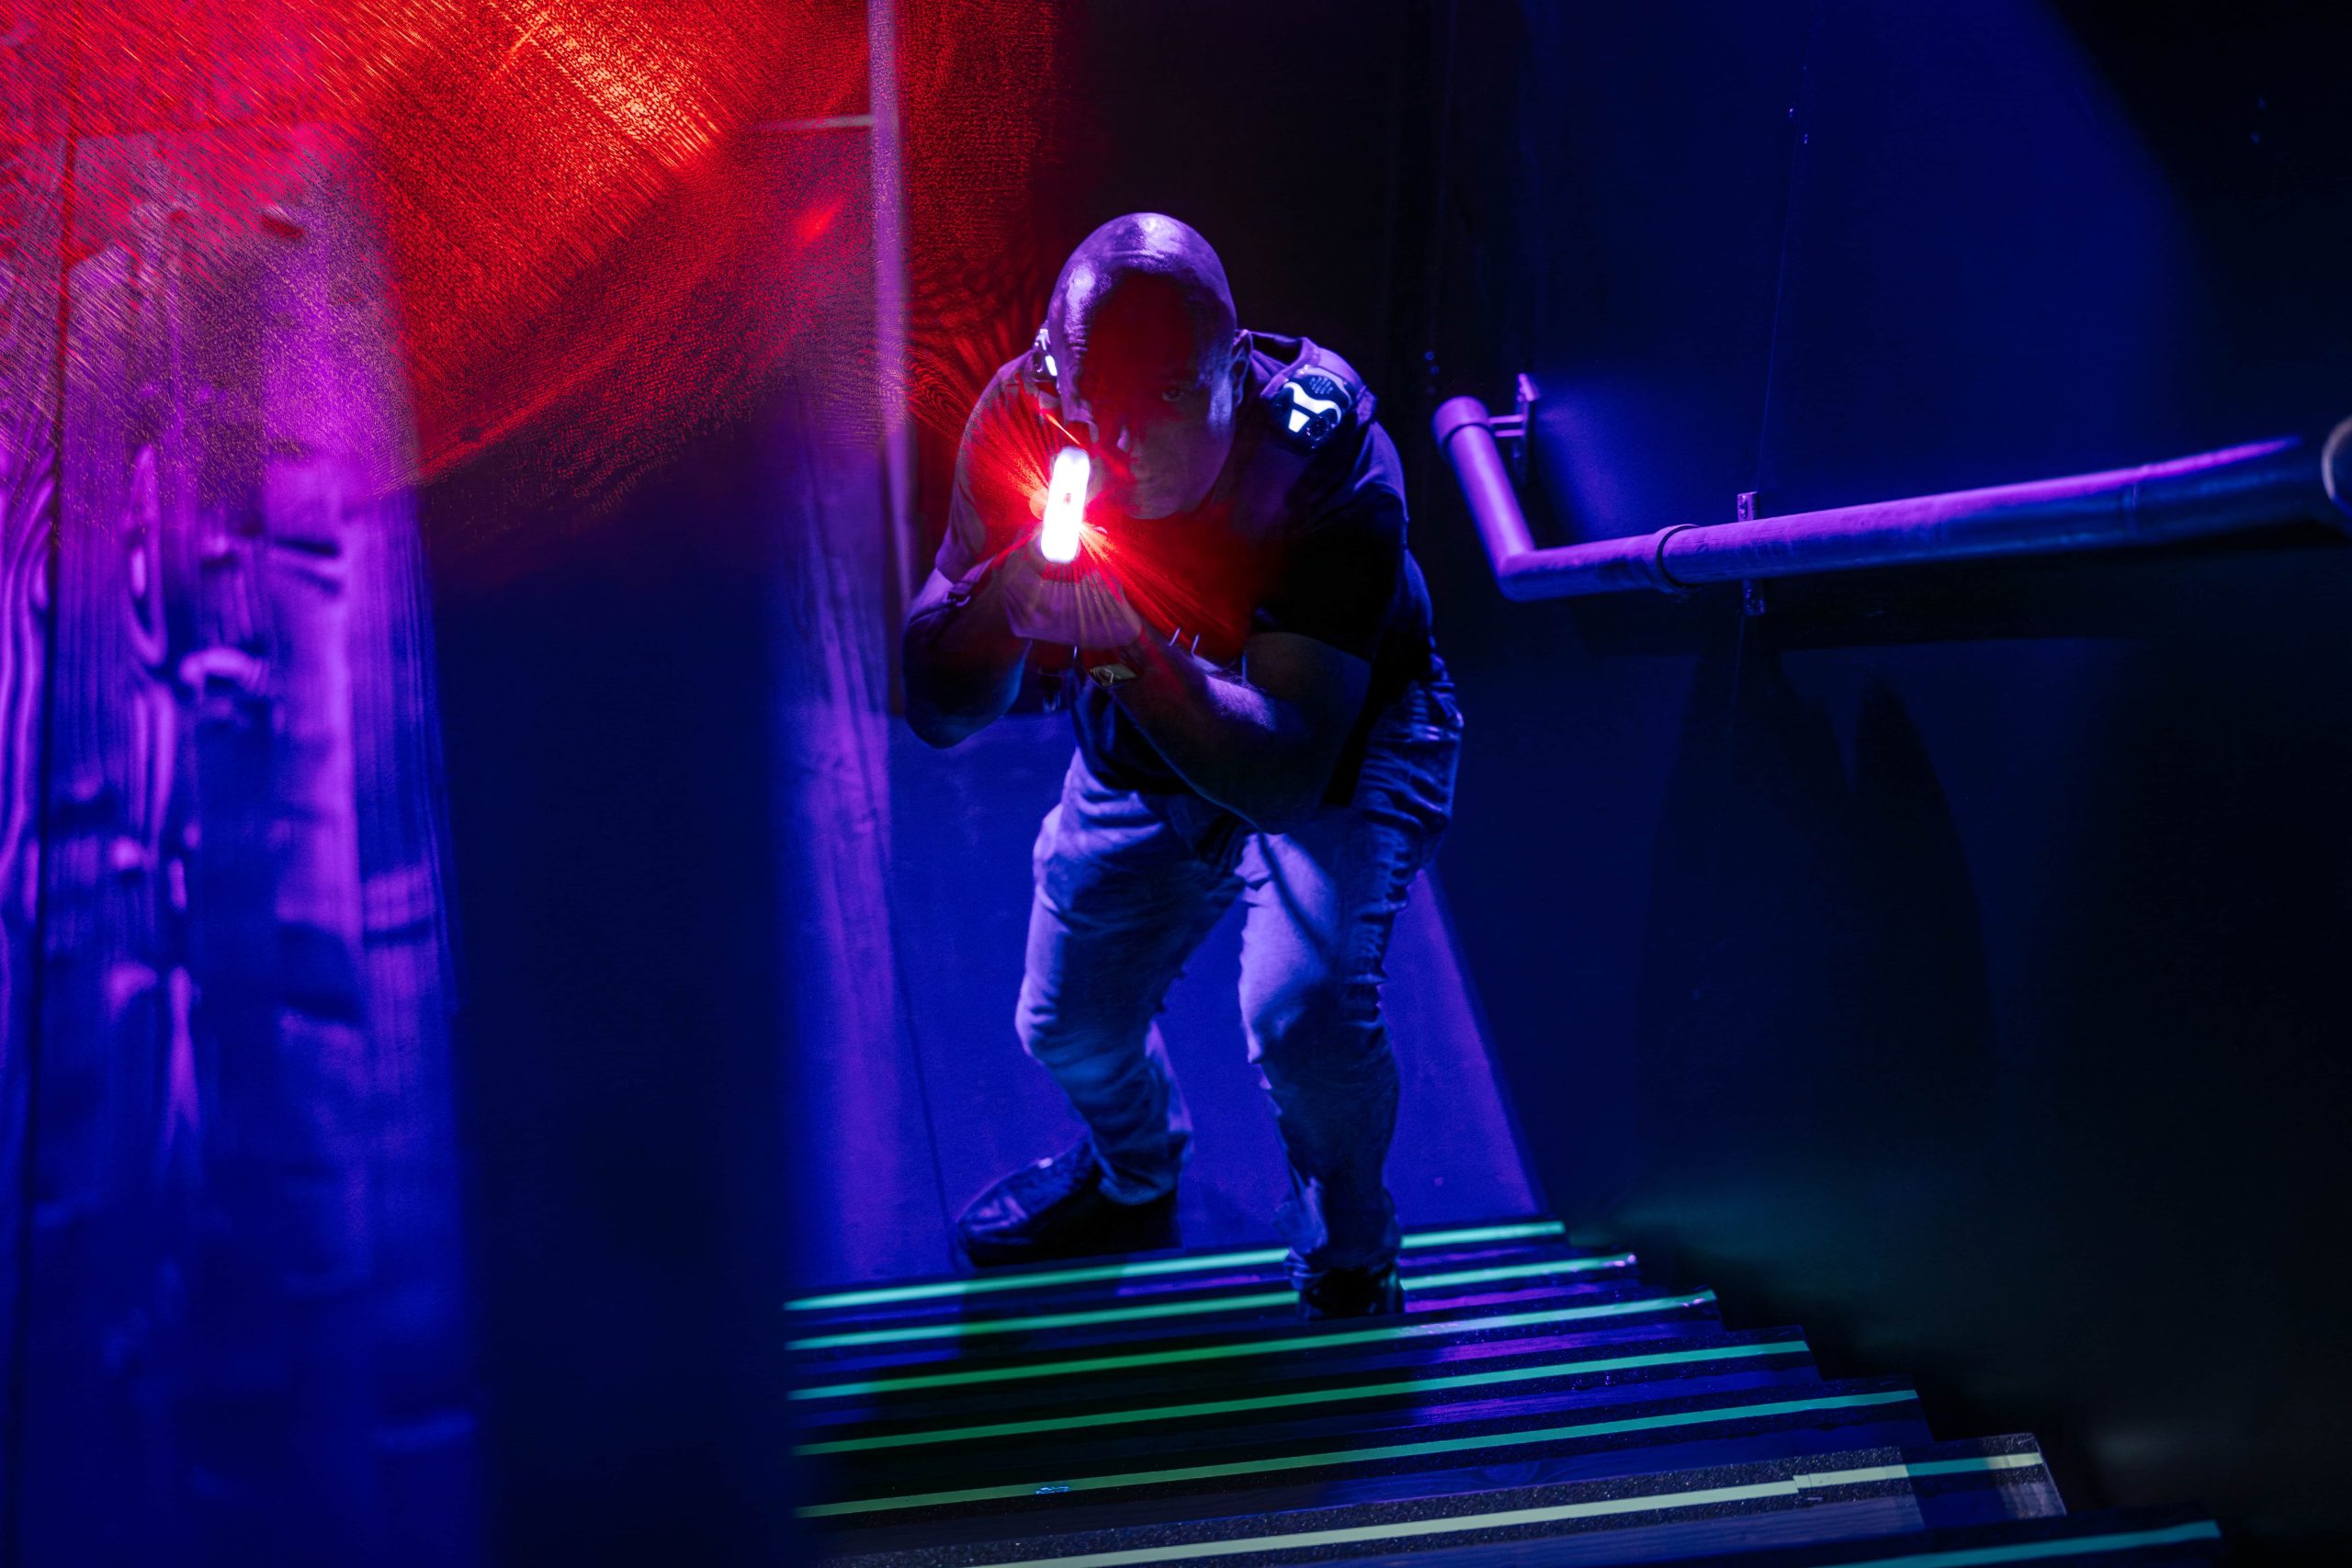 Player geared up for lasertag action in a neon-lit arena.